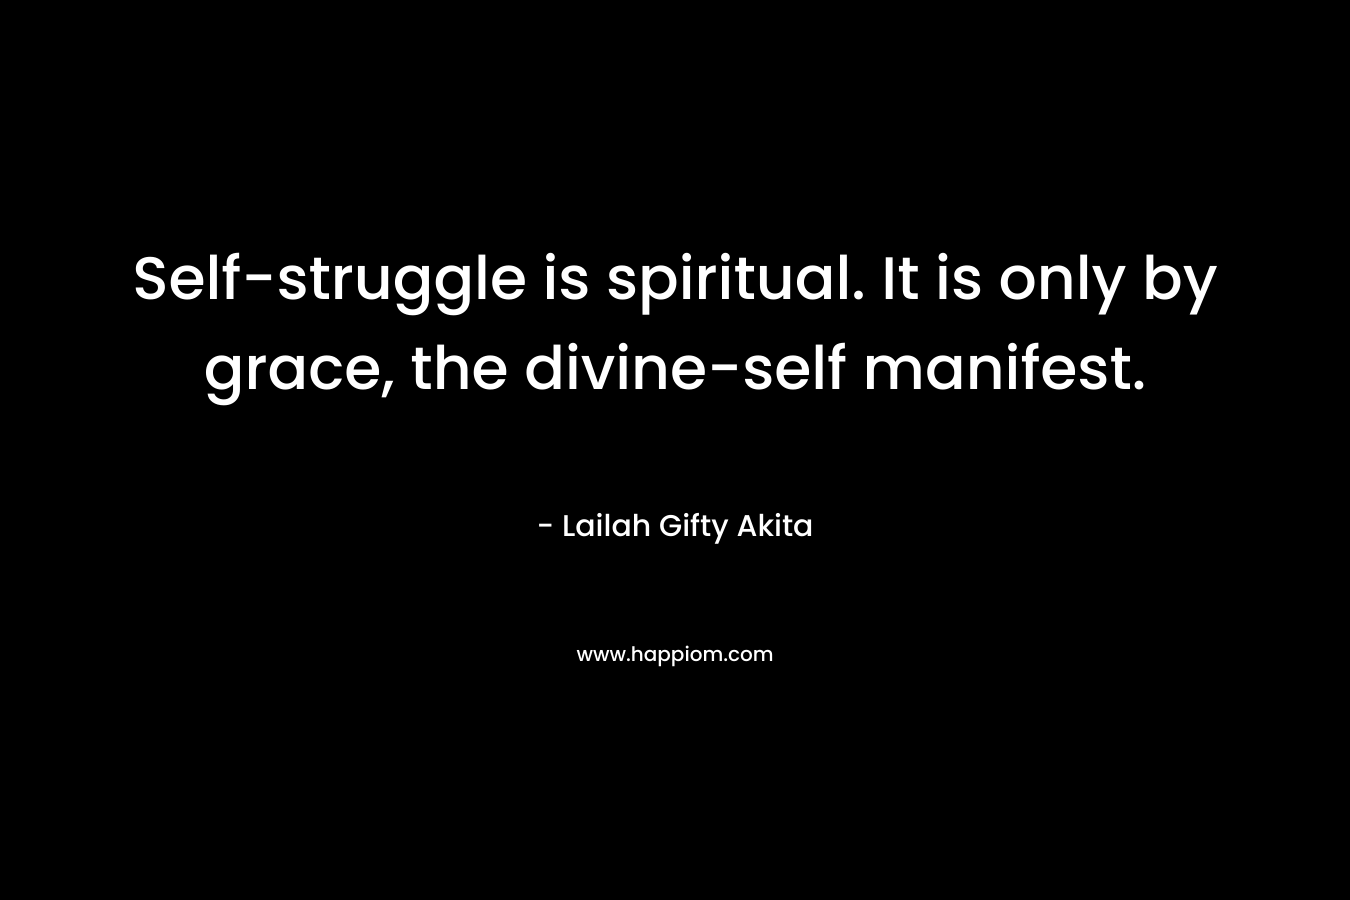 Self-struggle is spiritual. It is only by grace, the divine-self manifest. – Lailah Gifty Akita